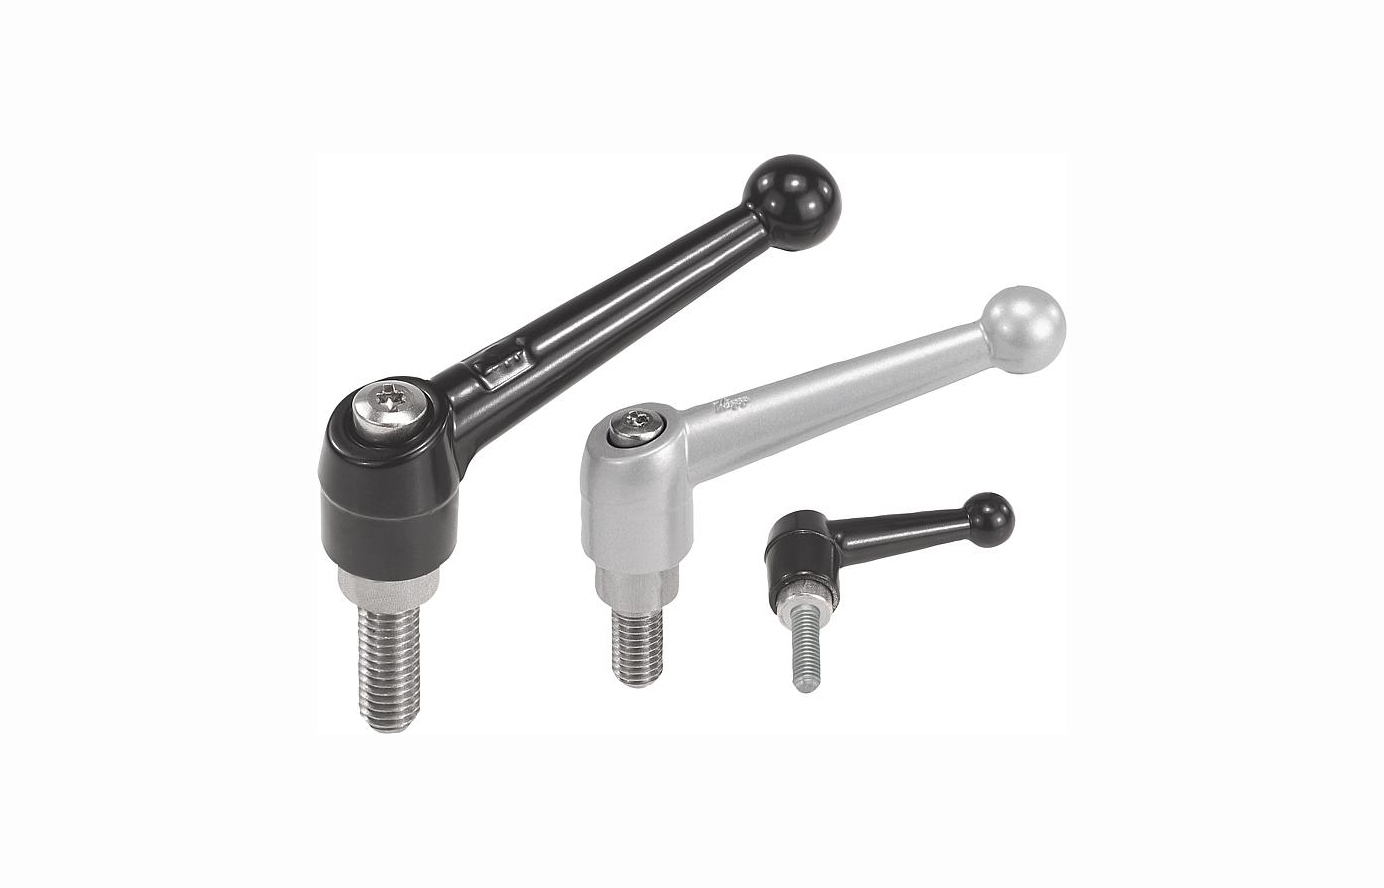 K0117 Clamping levers